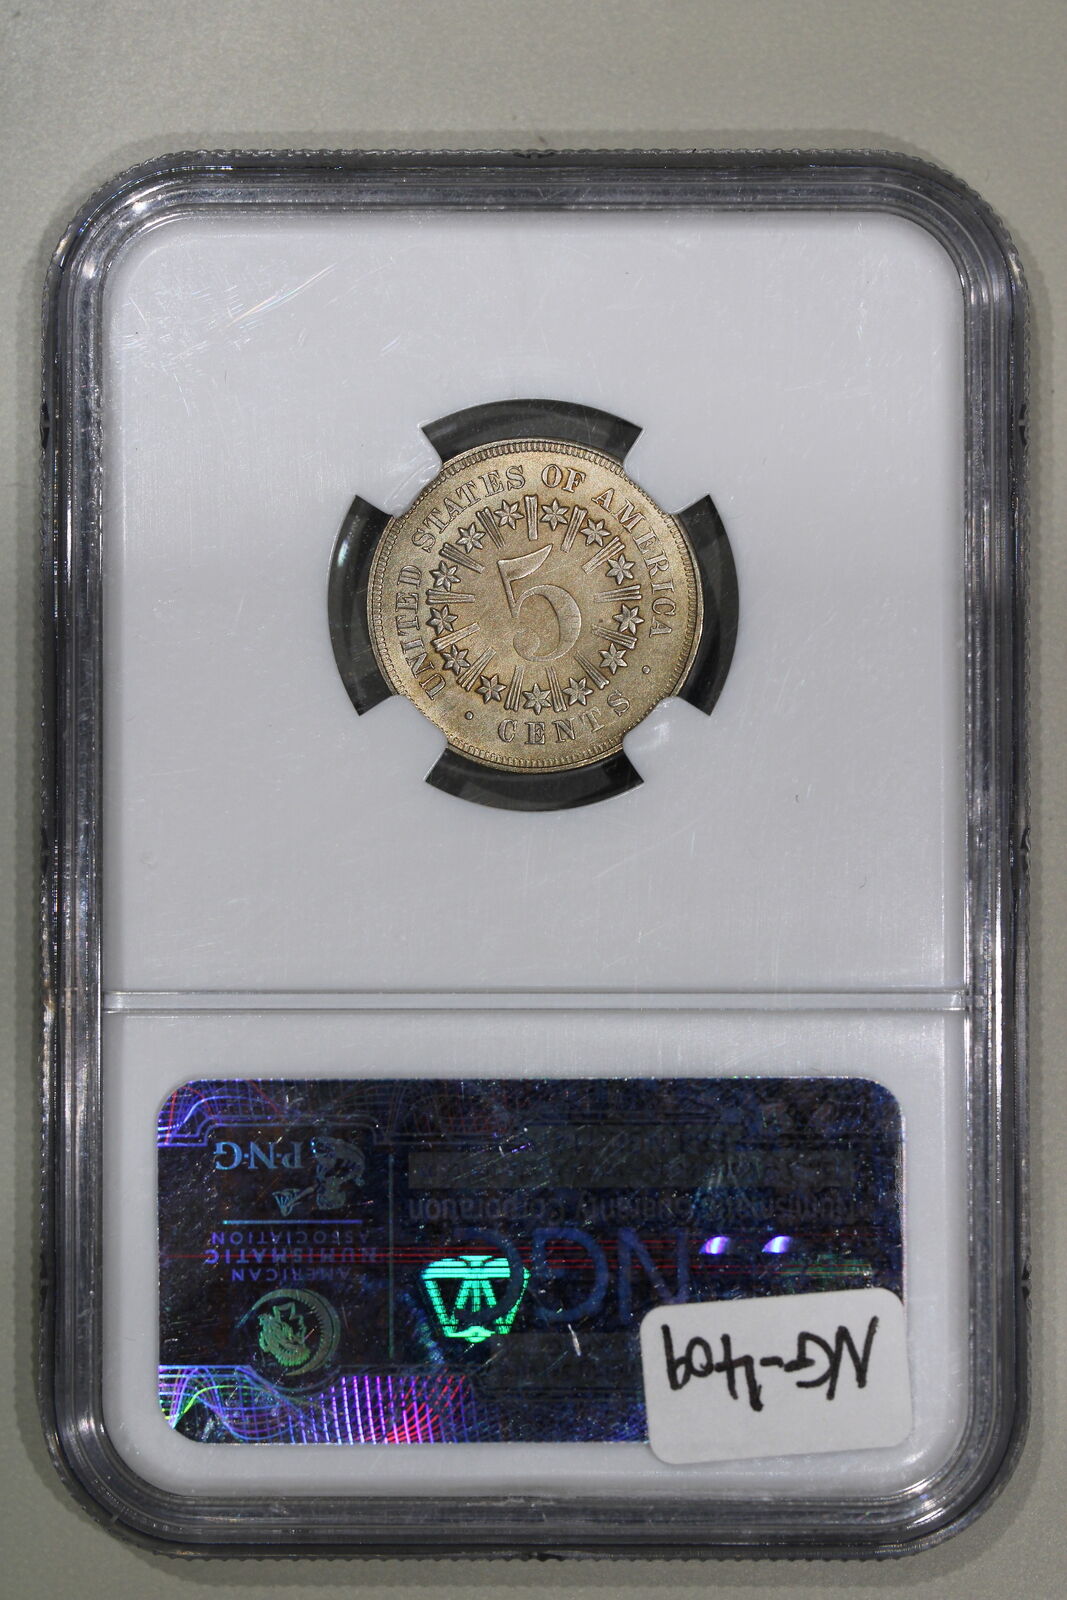 1867 (MS62 CAC) Shield Nickel WITH Rays 5c NGC Graded Coin